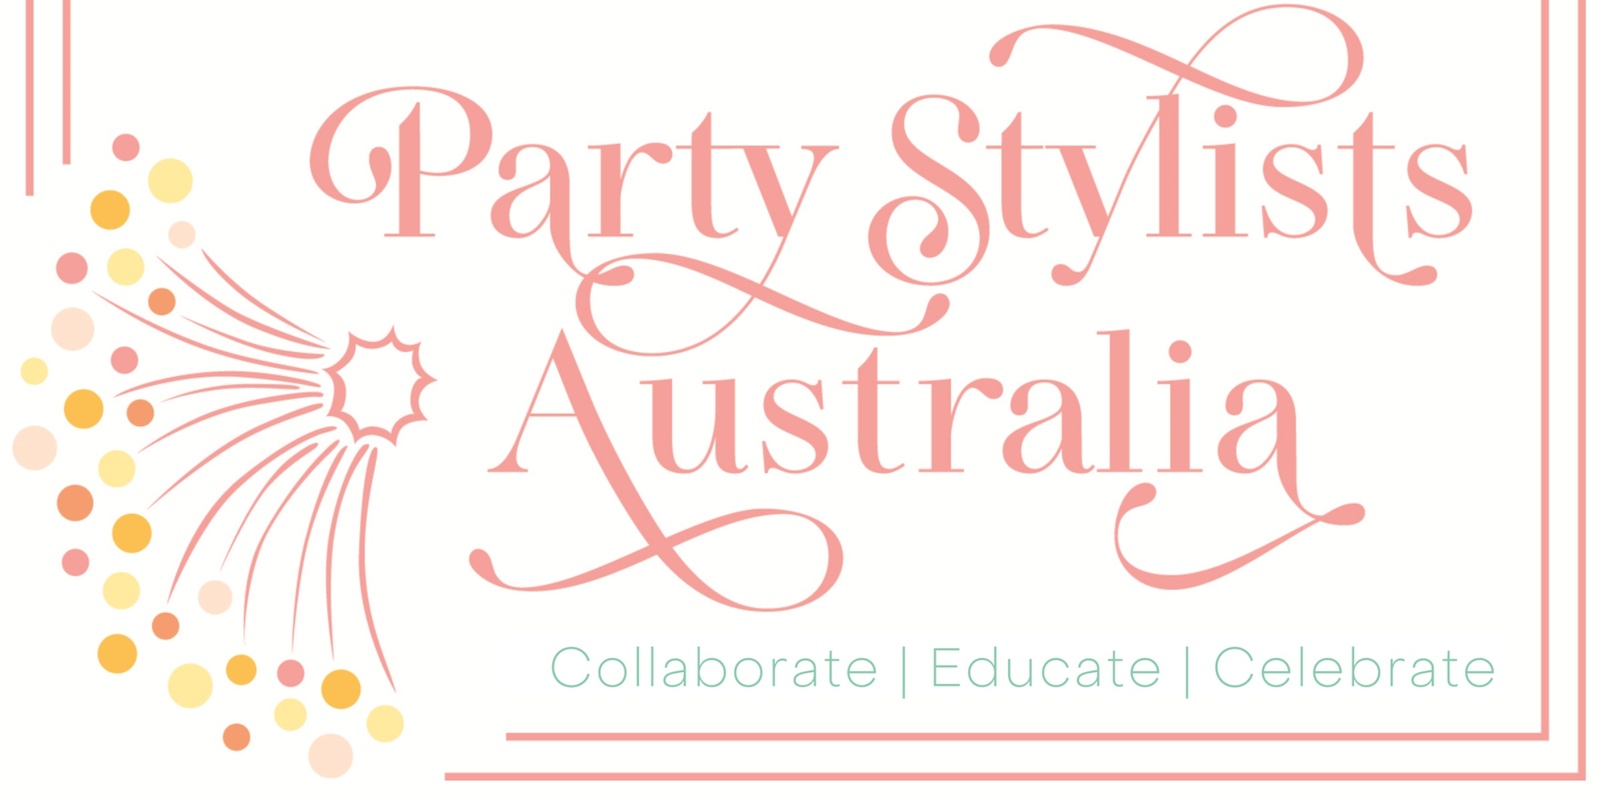 Party Stylists Australia's banner